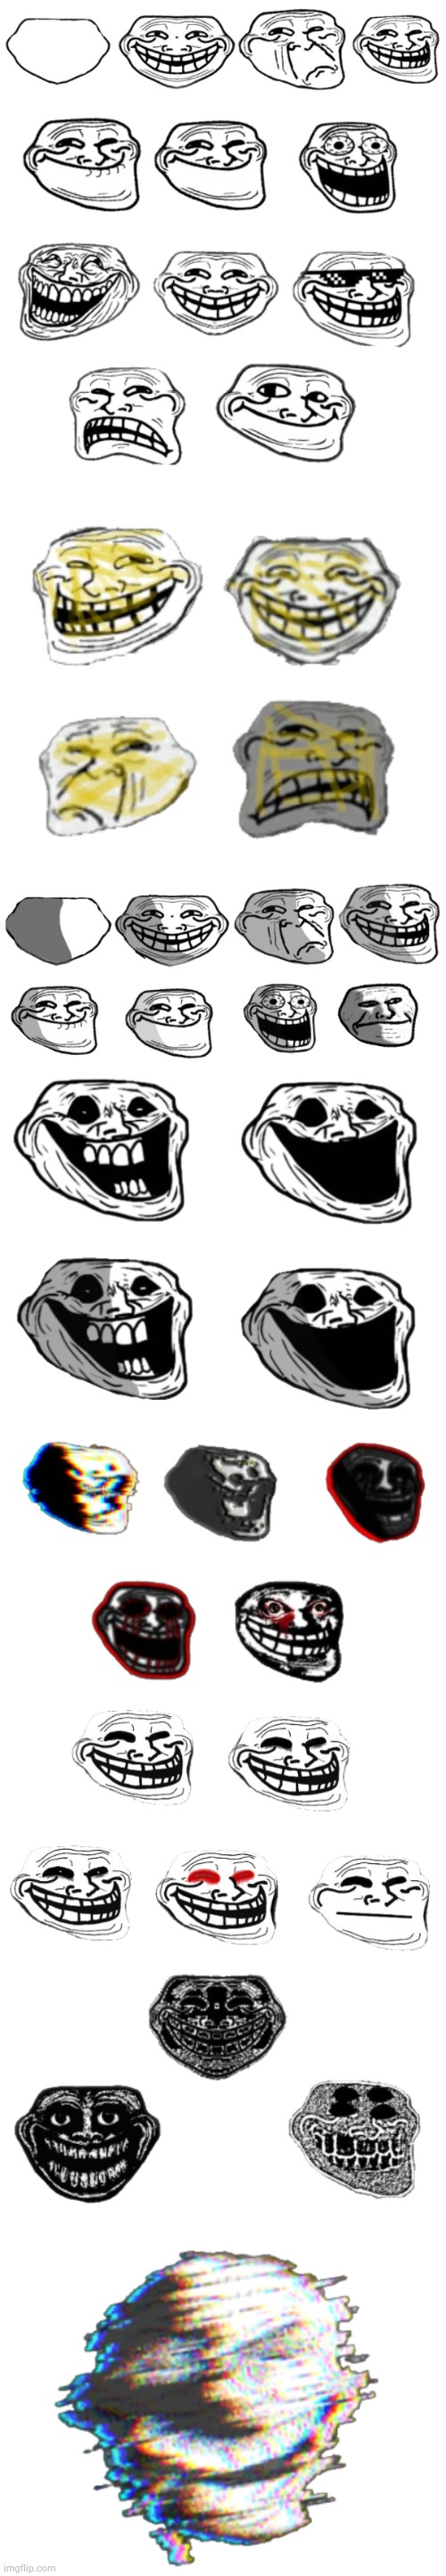 Every single Troll pack I have made, ever. Starting from innocent looking to absolute madness. | image tagged in trollface pack,trollface pack plus,trollface pack extension,shadow troll pack,trollge pack,trollge pack plus | made w/ Imgflip meme maker